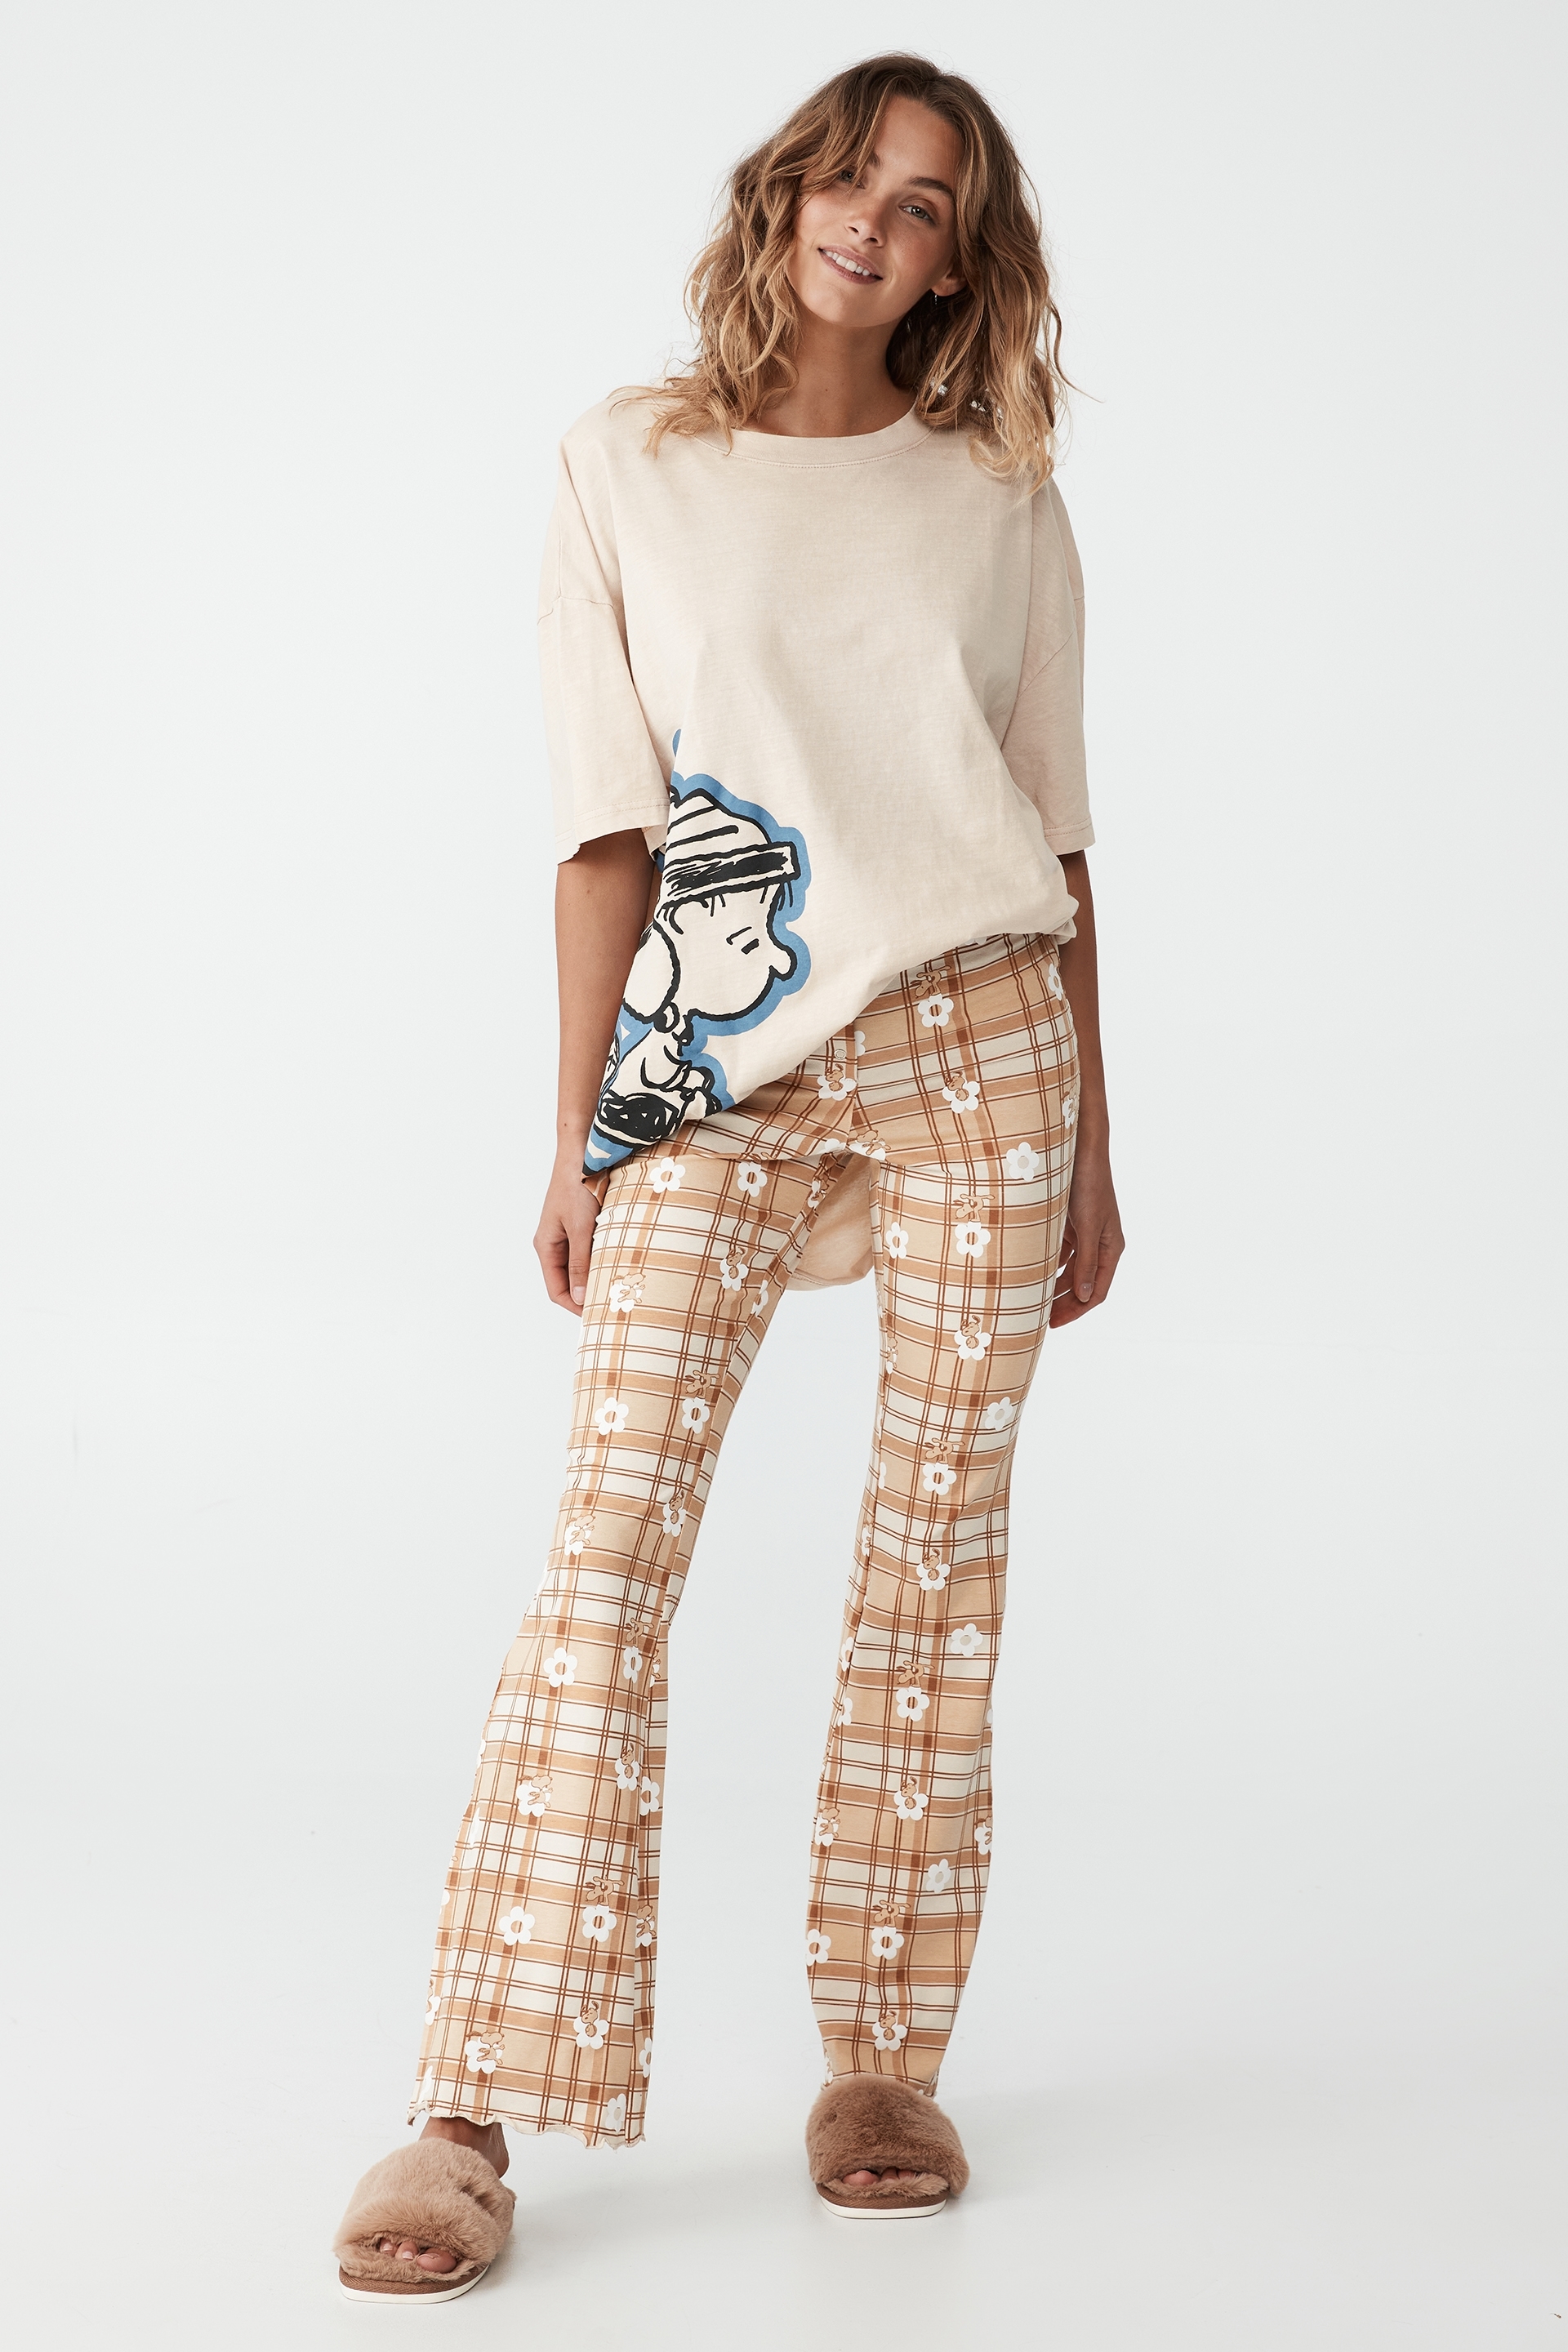 Body - Jersey Bed Flare Pant - Lcn pea/snoopy floral checkerboard